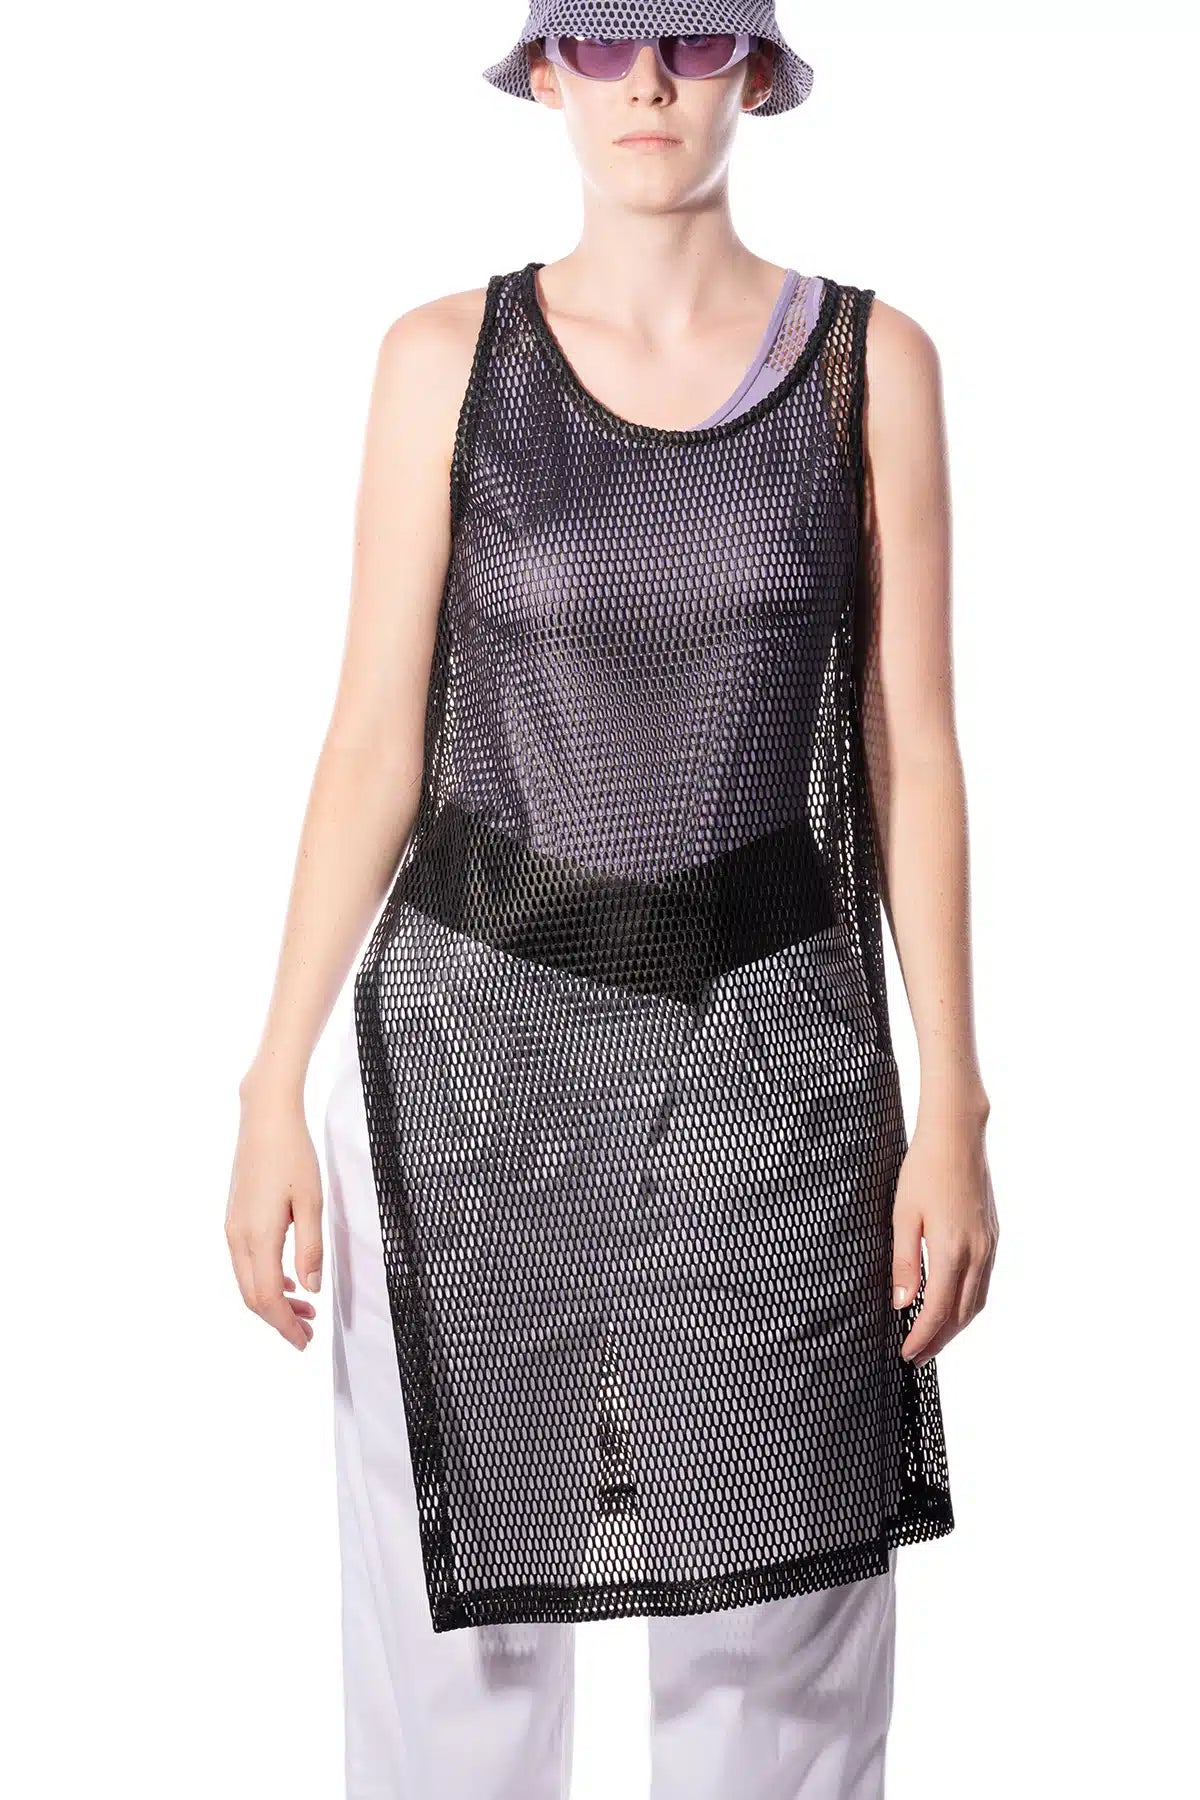 SLEEVELESS MESH TUNIC - ONE LEFT in size L!